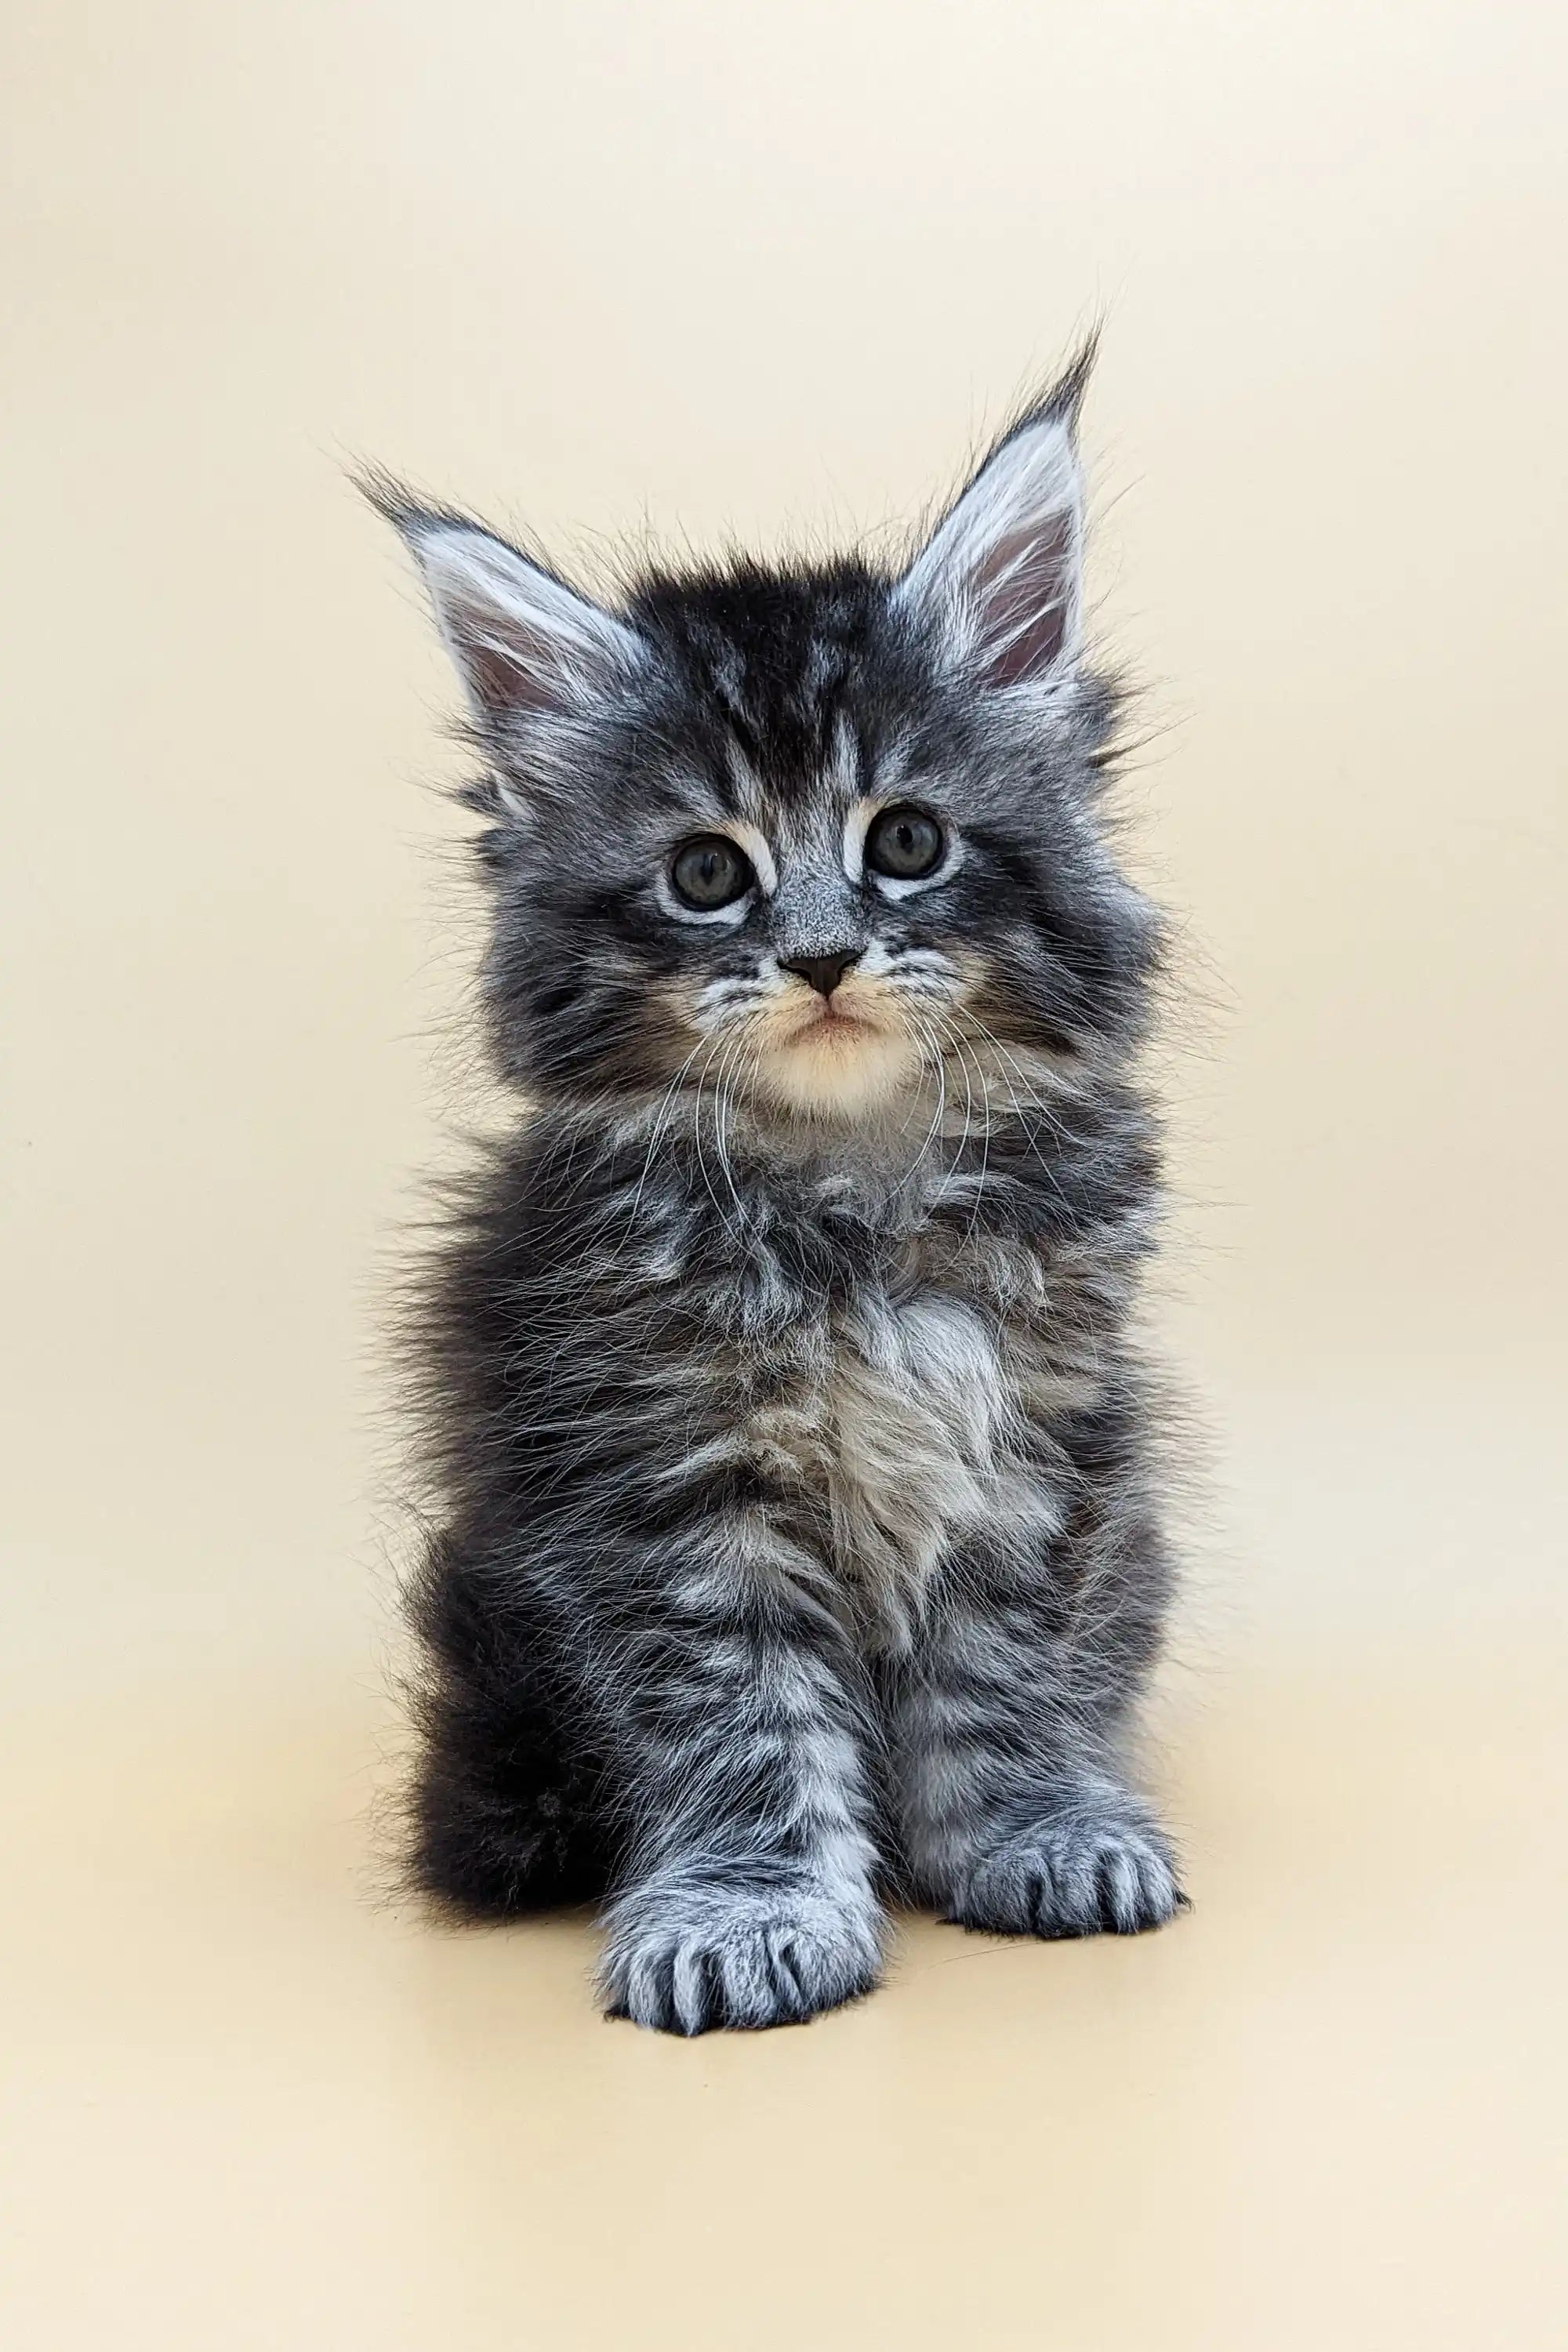 Maine Coon Kittens for Sale Barby | Kitten